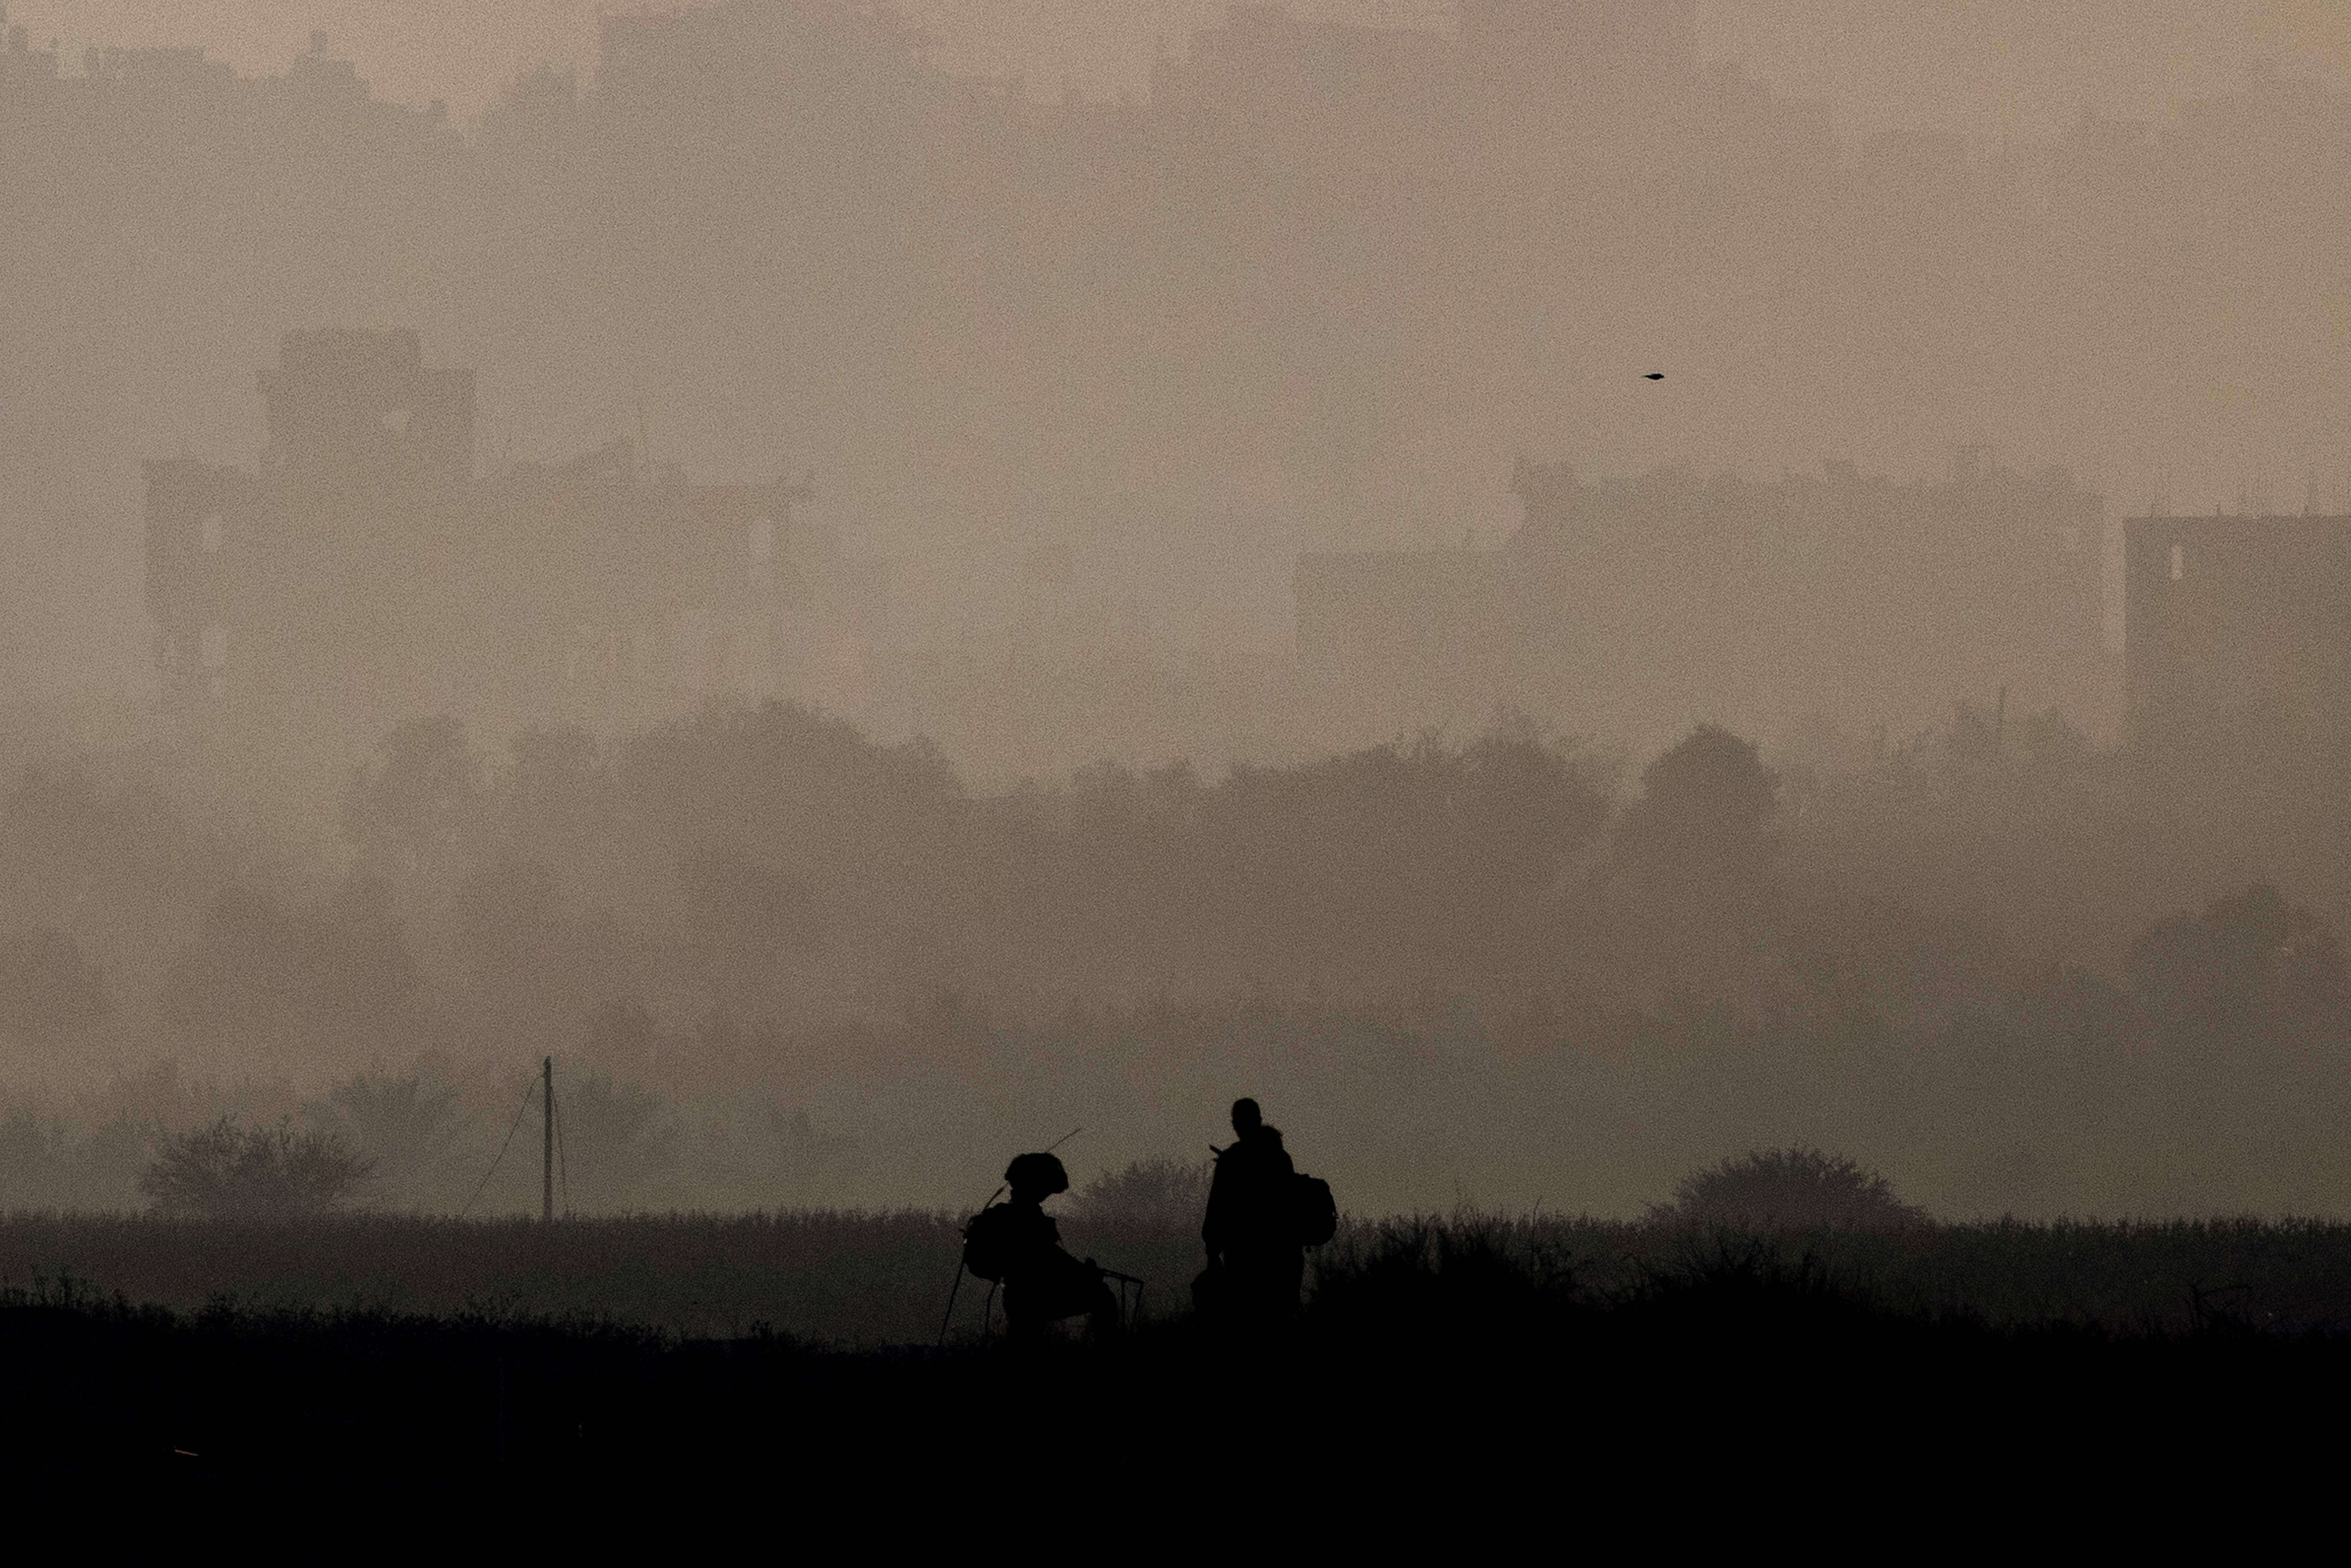 Israeli soldiers patrol near the border with the Gaza Strip in southern Israel on Nov. 16.